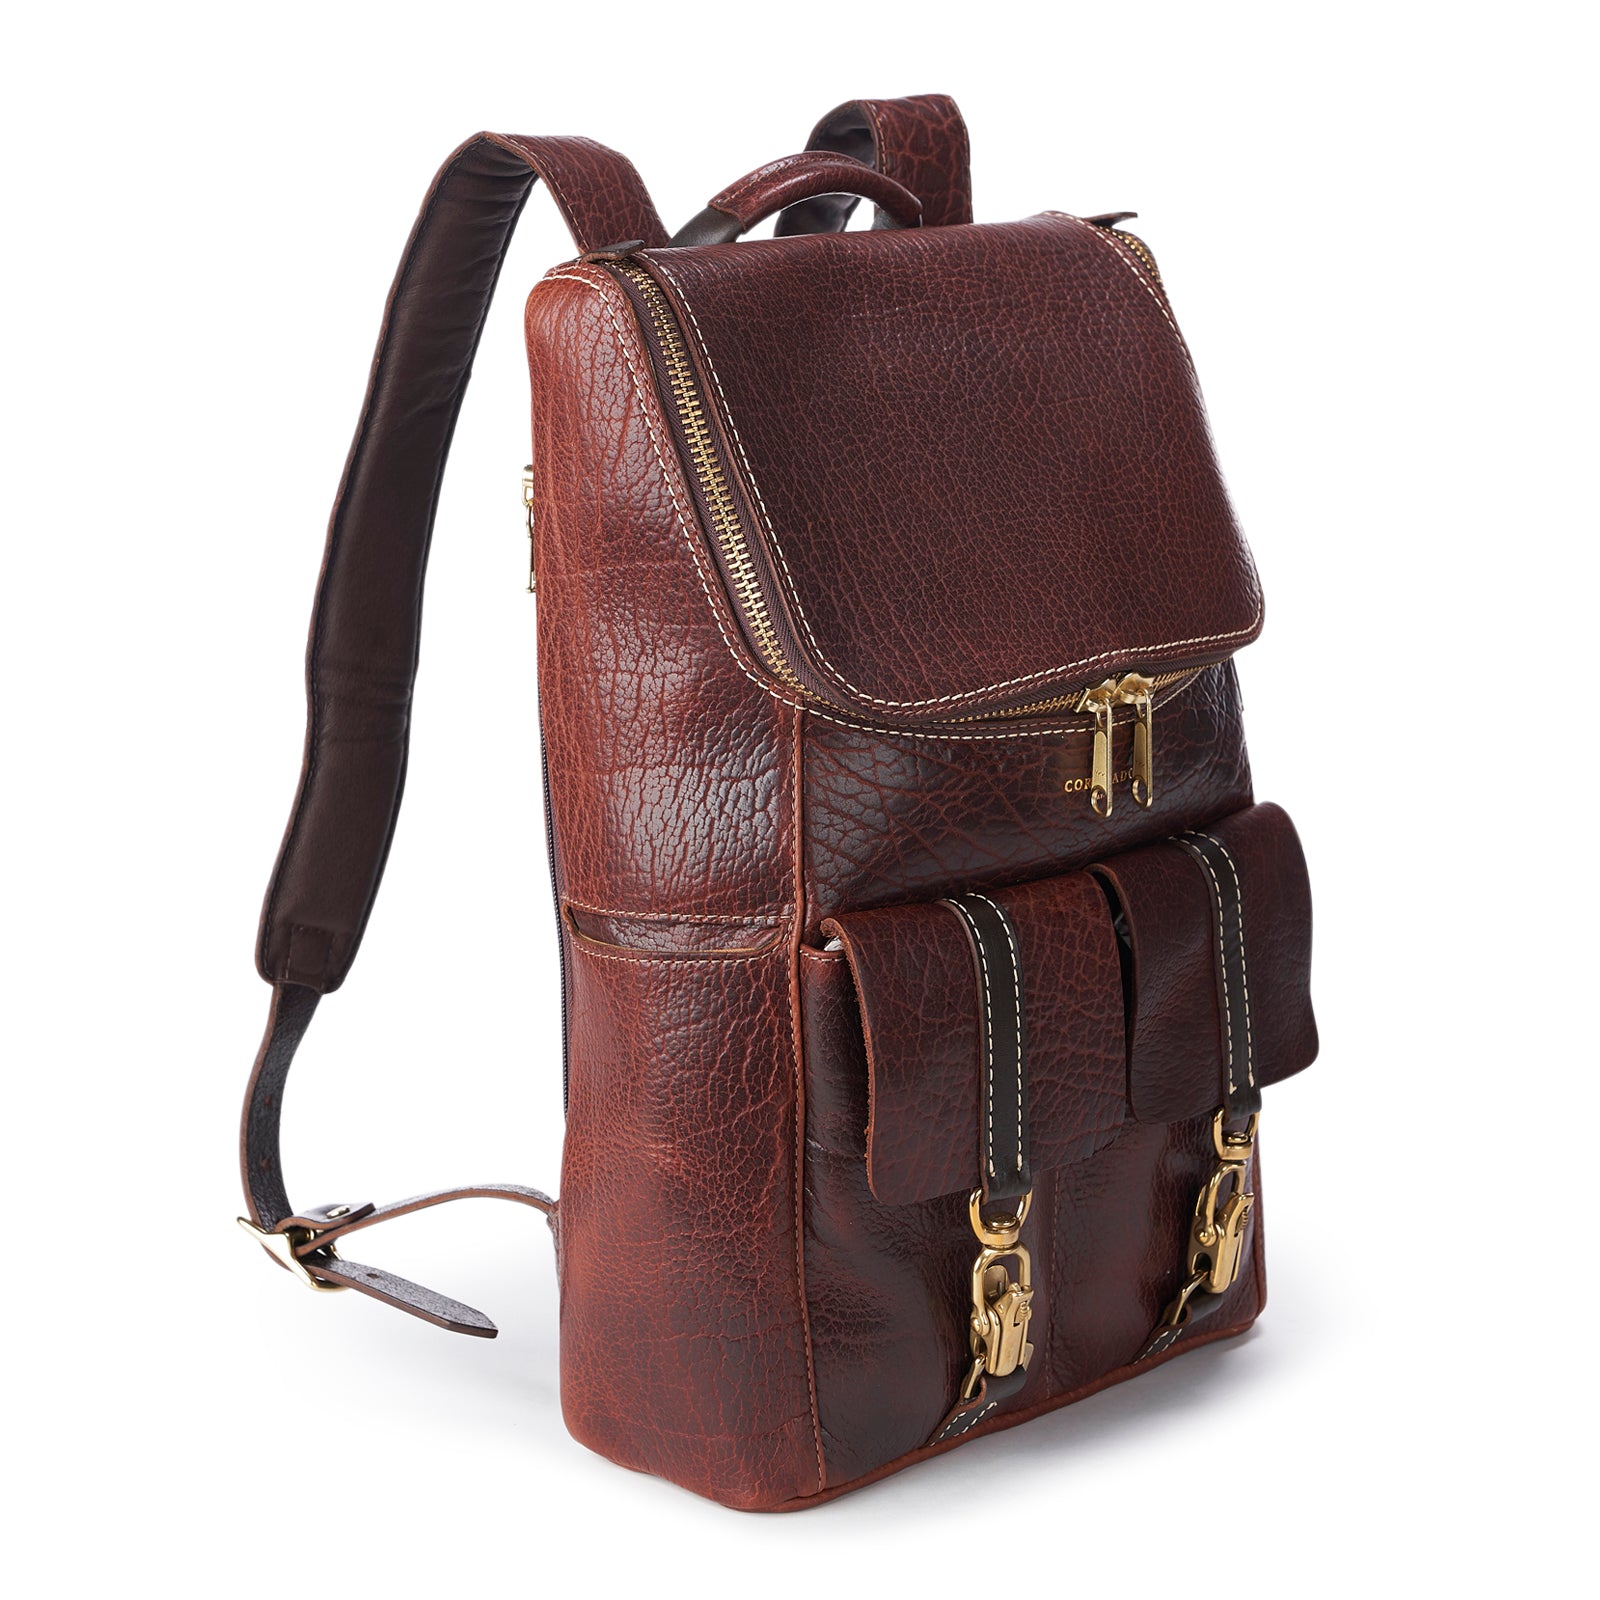 FIREHEAD BACKPACK – Luxury leather goods